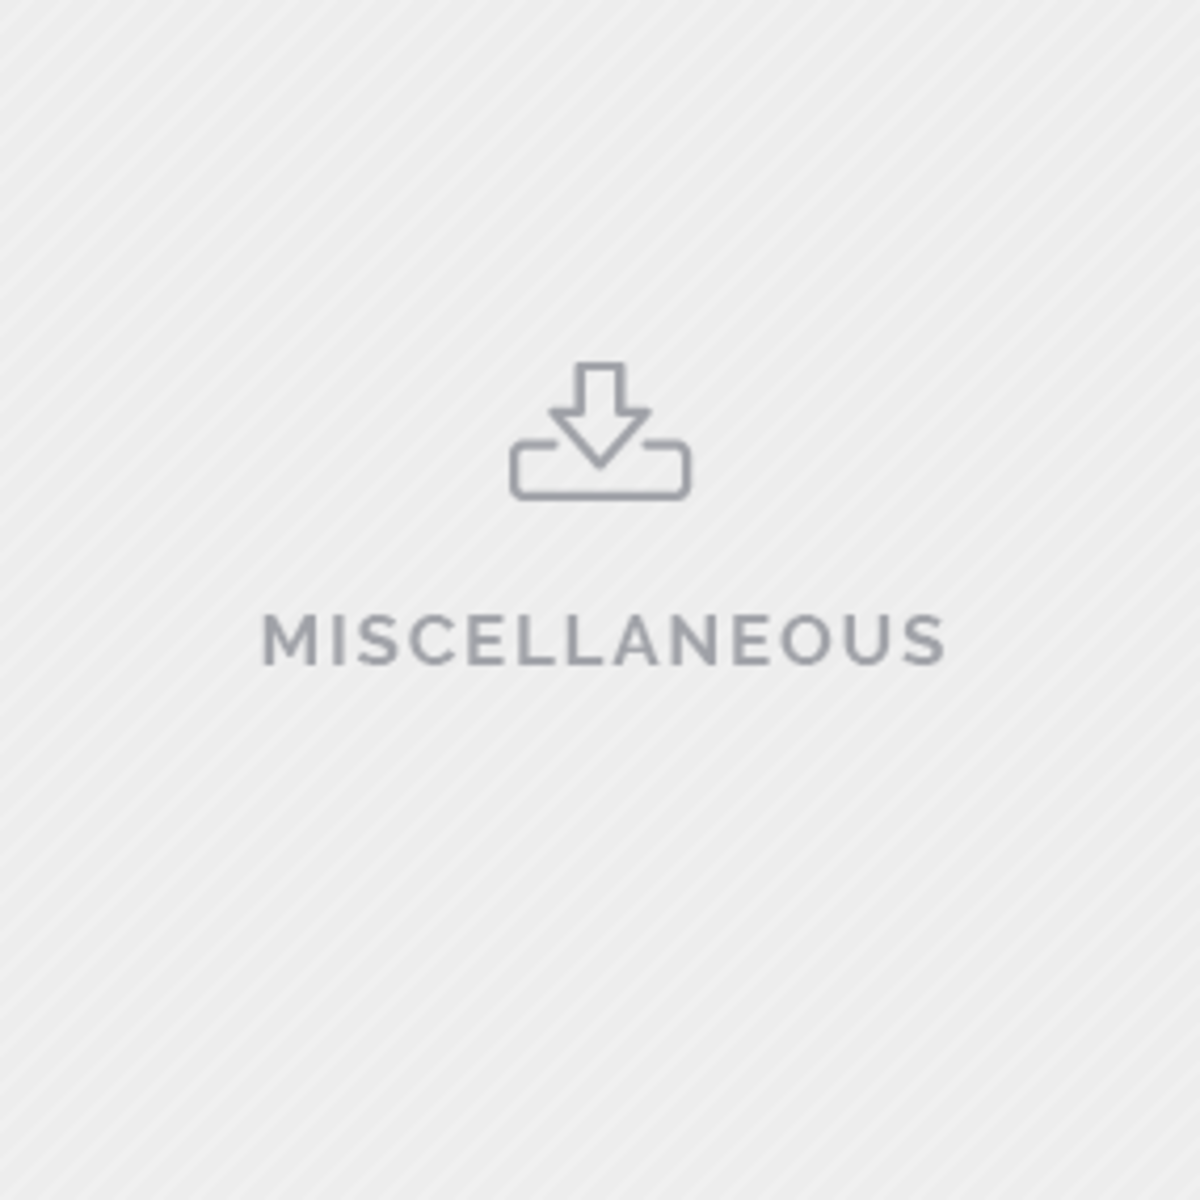 download MISCELLANEOUS